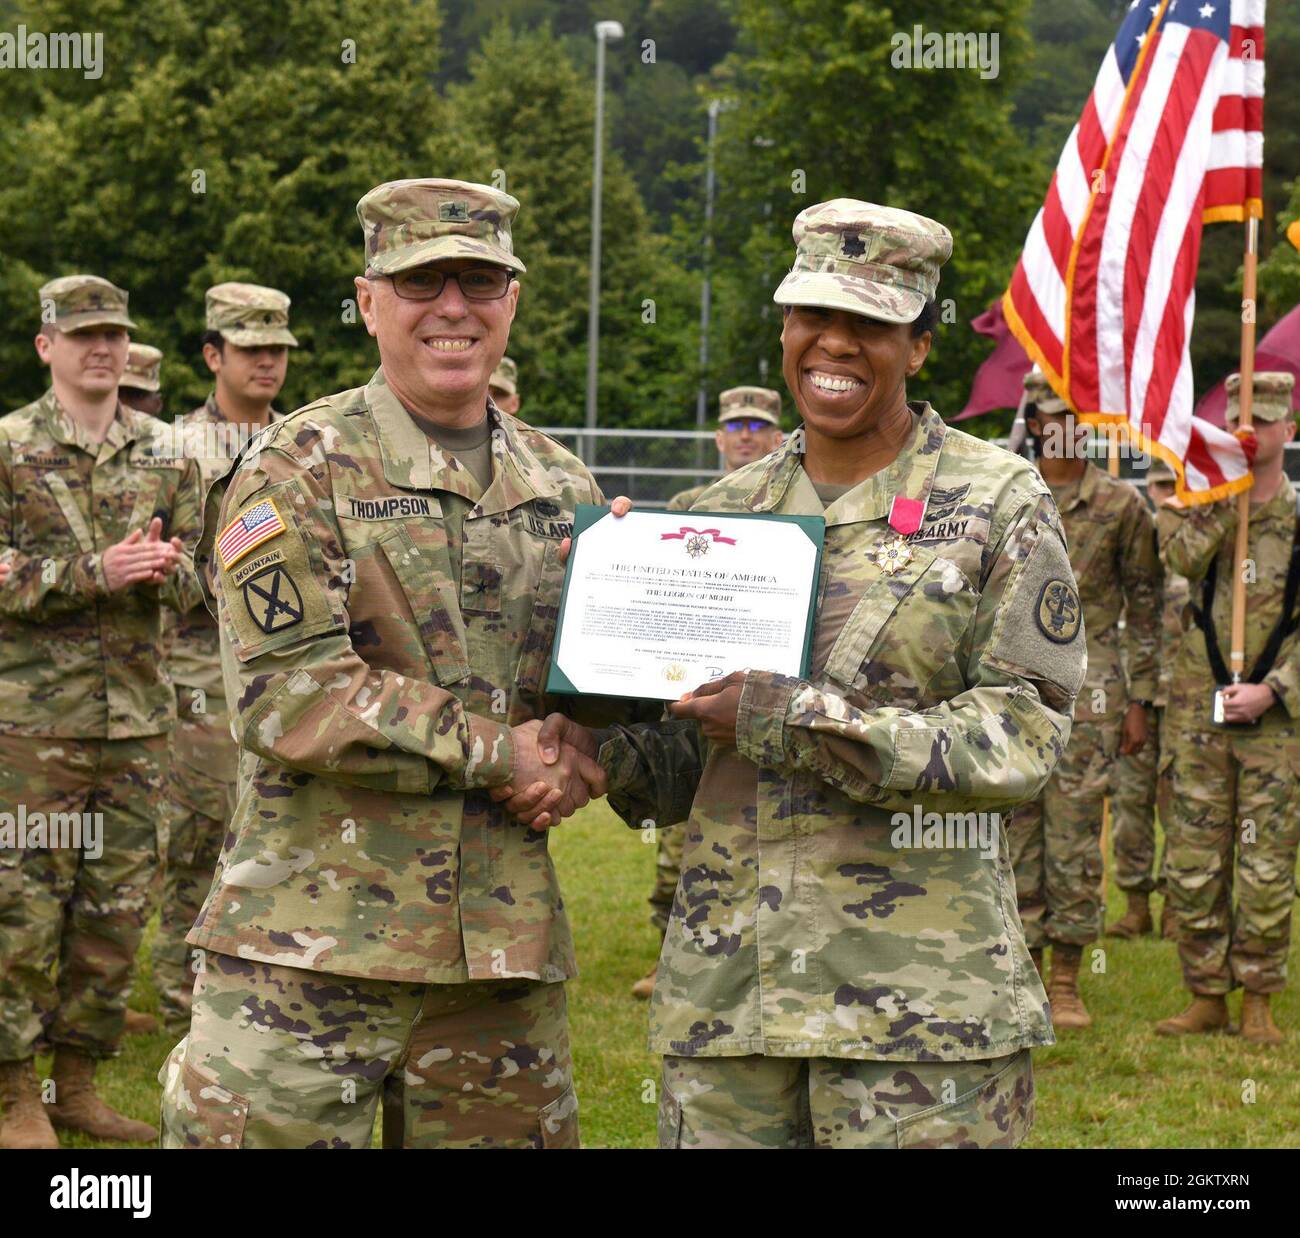 U.S. Army Brig. Gen. Mark Thompson, Regional Health Command Europe Commanding General and U.S. Army Europe and Africa Command Surgeon and Lt. Col. Christina M. Buchner, Landstuhl Regional Medical Center’s outgoing Troop Commander smile for the camera before a change of command ceremony at Landstuhl, Germany, July 1, 2021. Lt. Col. Casey Wilson assumed command of the unit from Buchner. Stock Photo